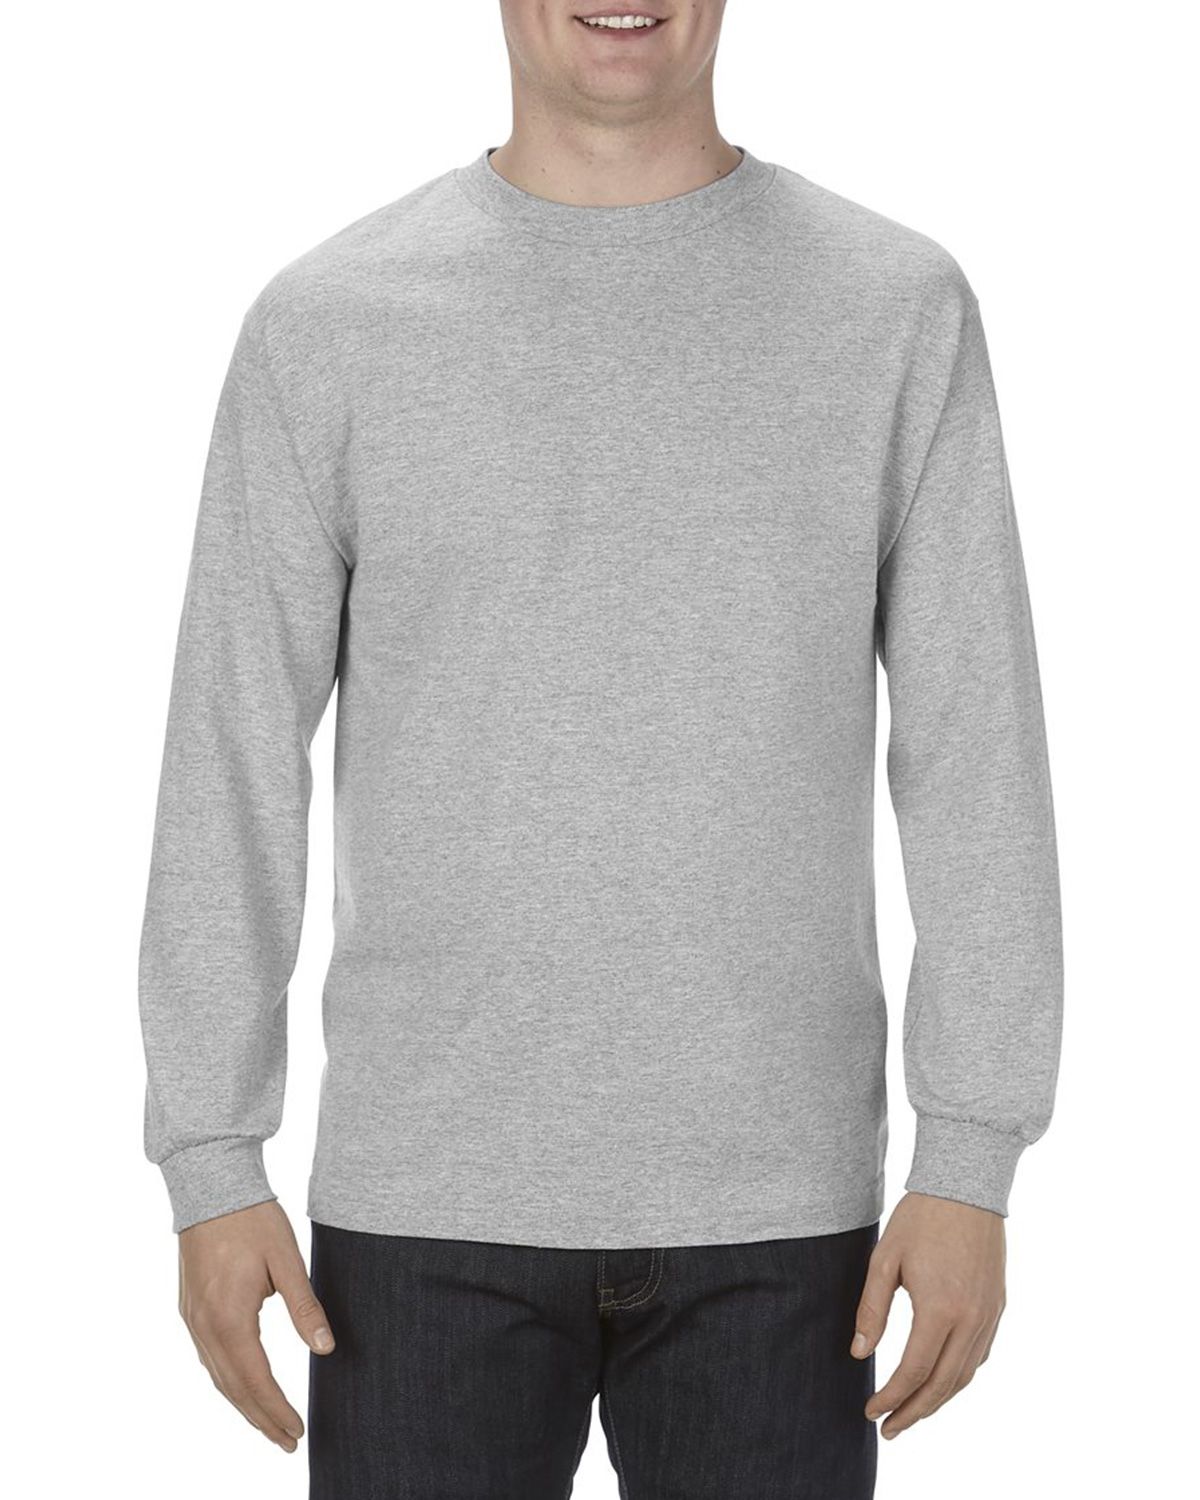 Alstyle 1304 Classic Long Sleeve T-Shirt